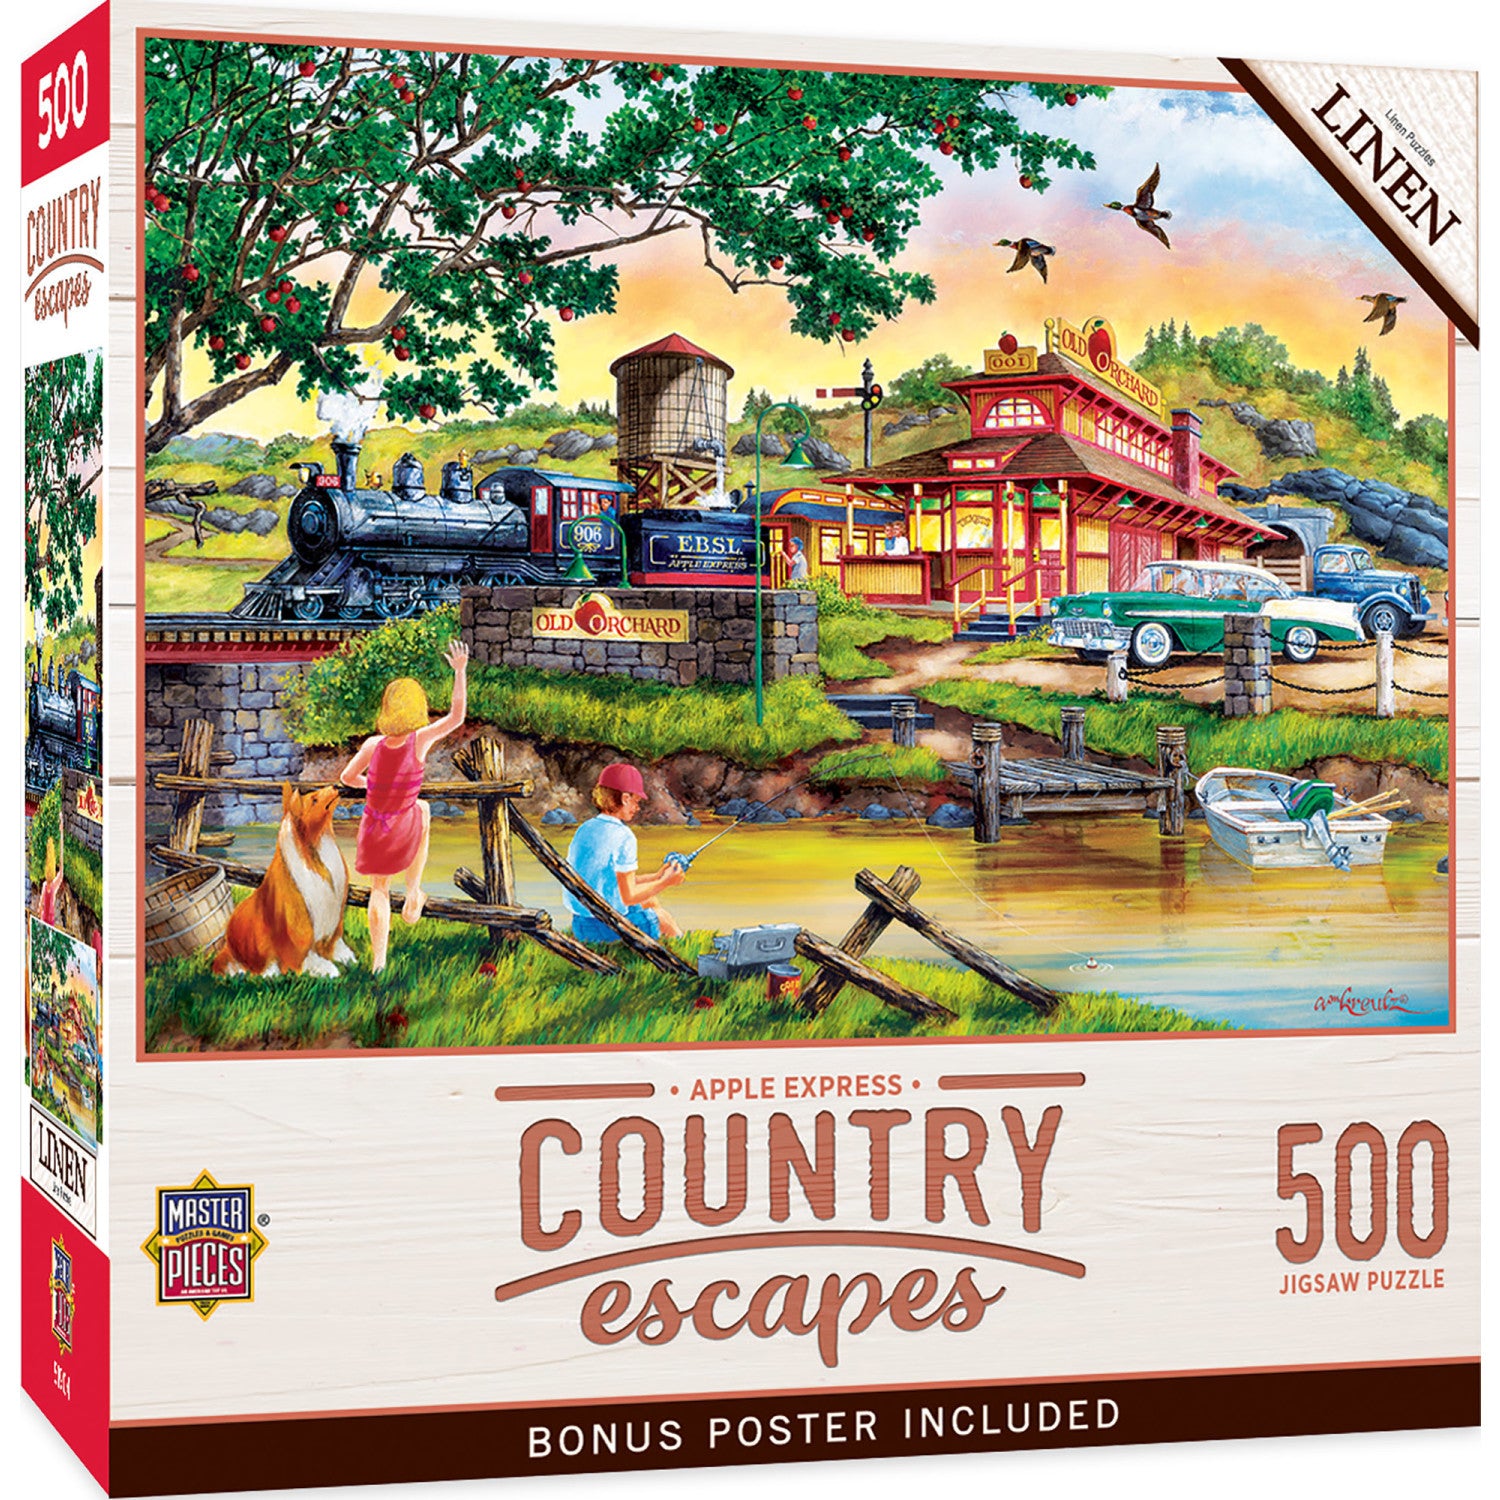 Country Escapes - Apple Express 500 Piece Jigsaw Puzzle